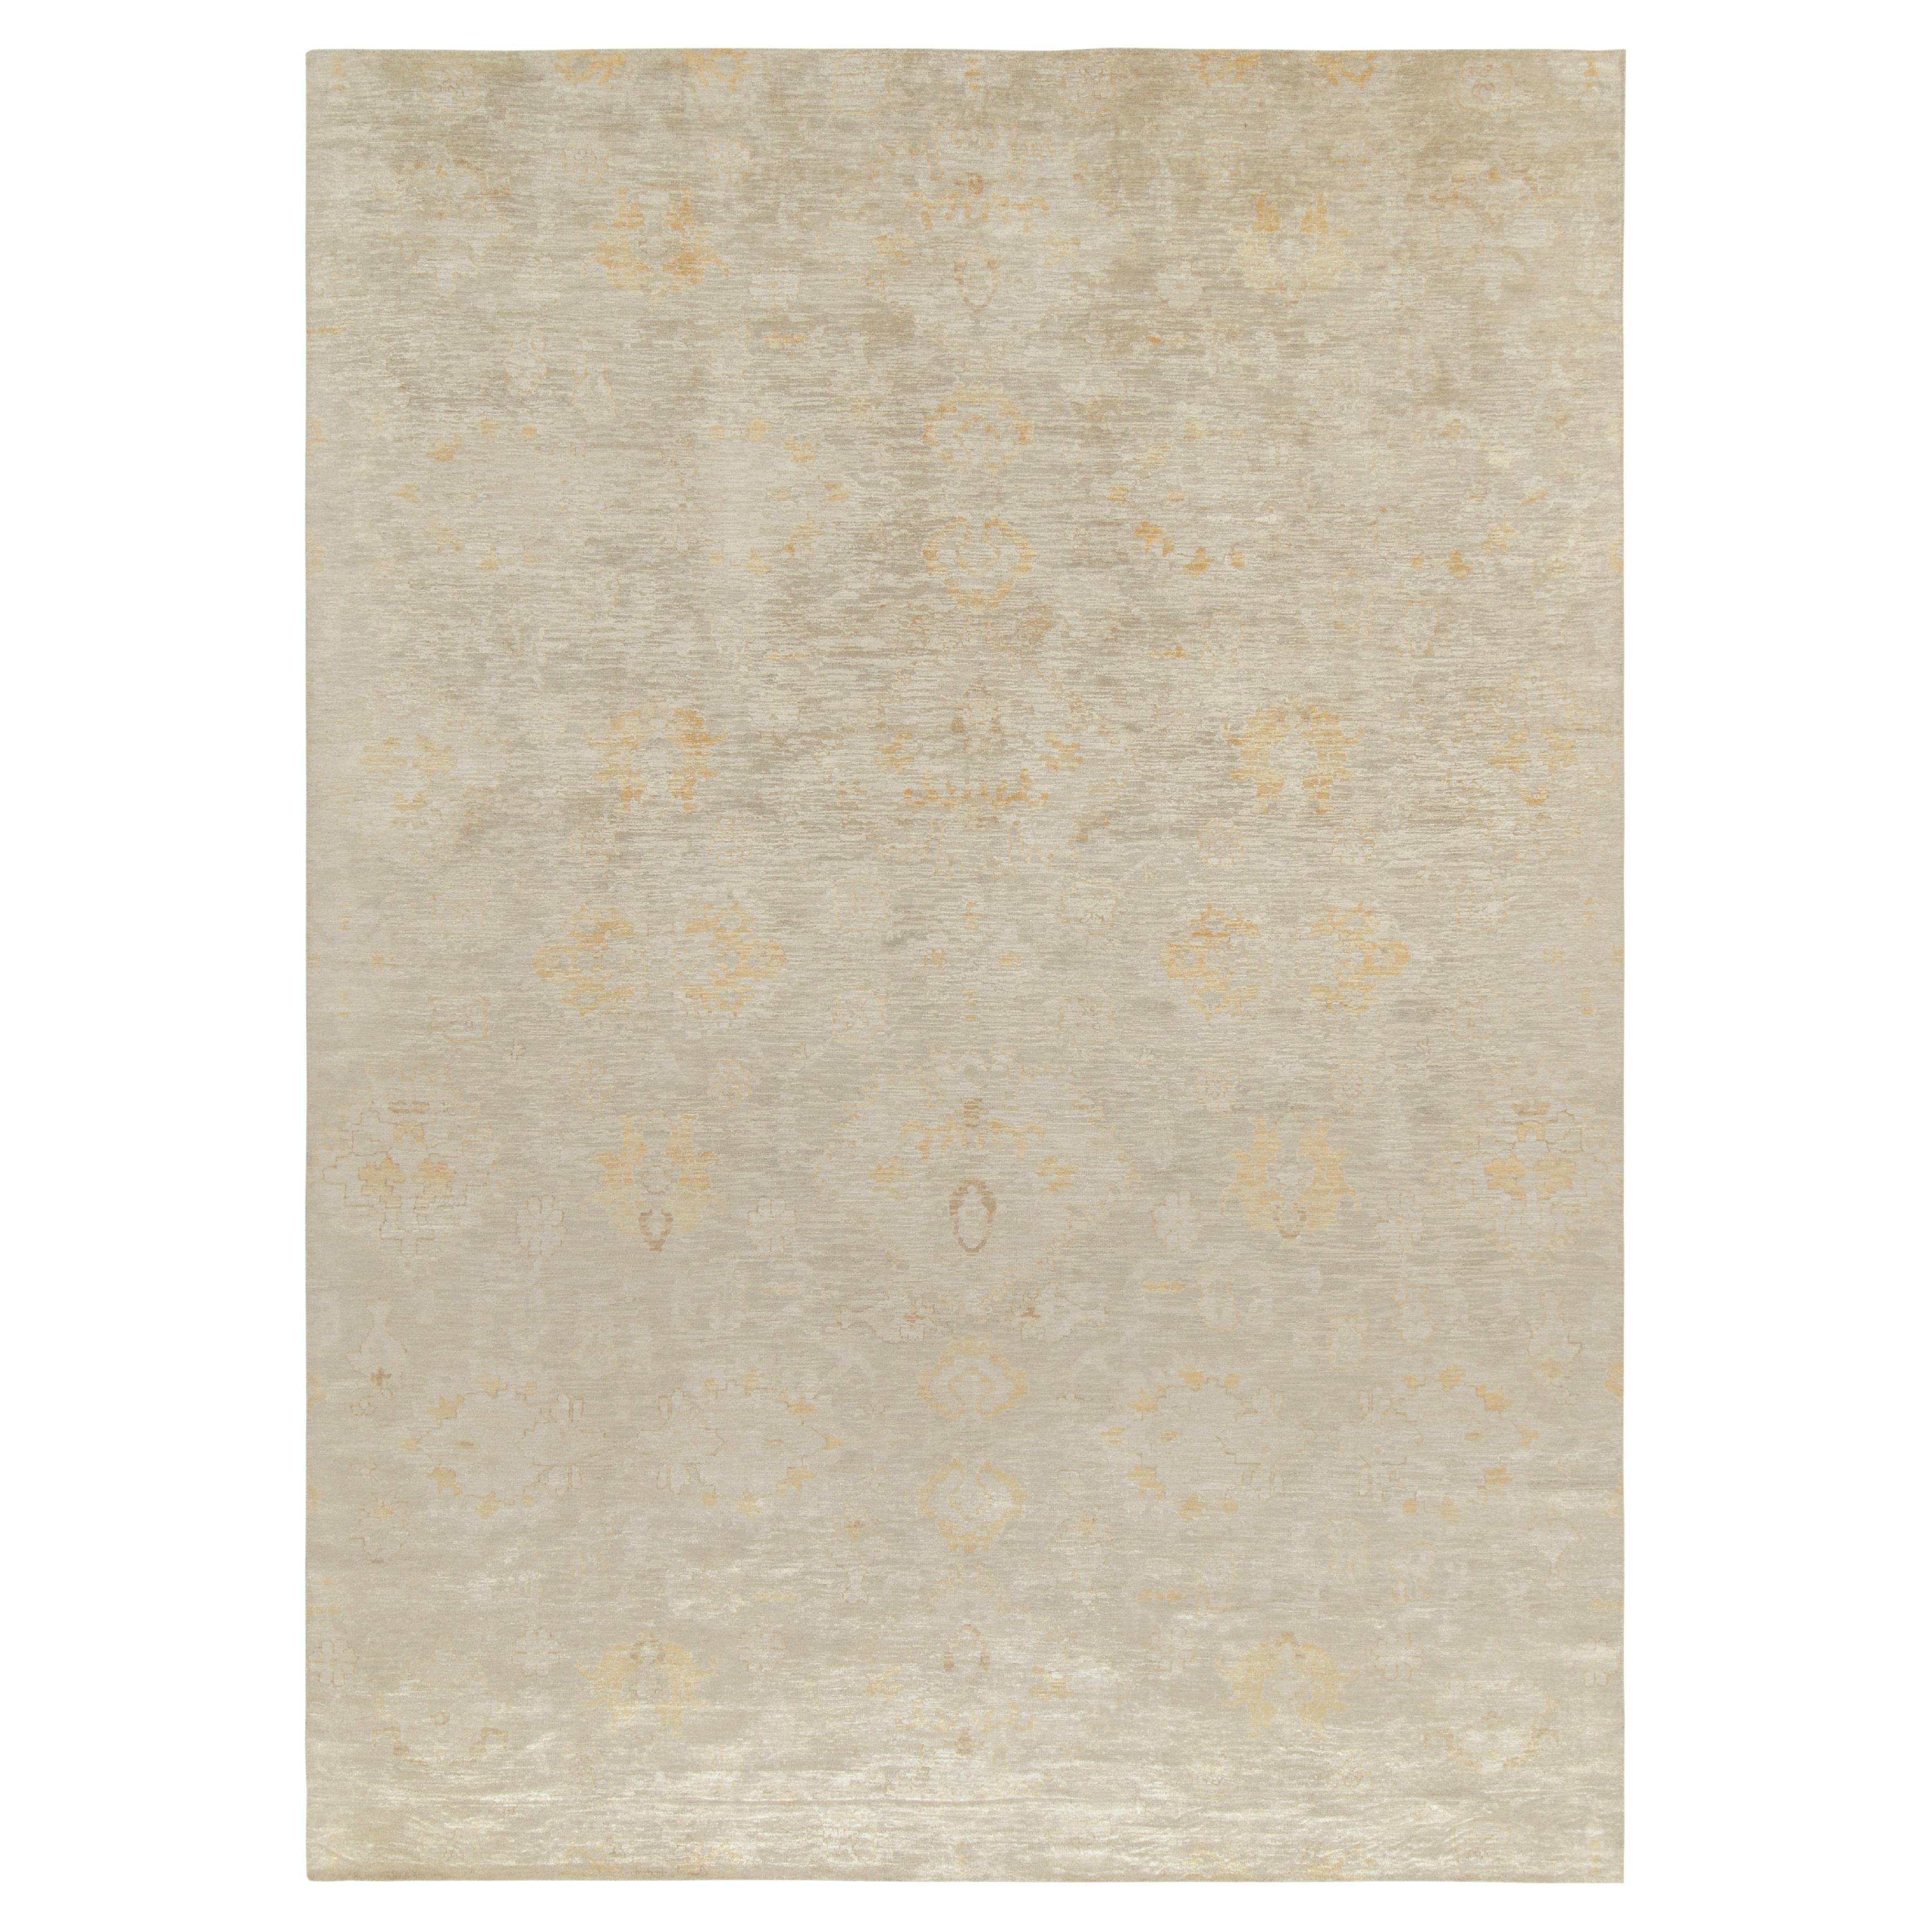 Rug & Kilim’s Contemporary Abstract Rug in Off-White, Beige and Gold Florals